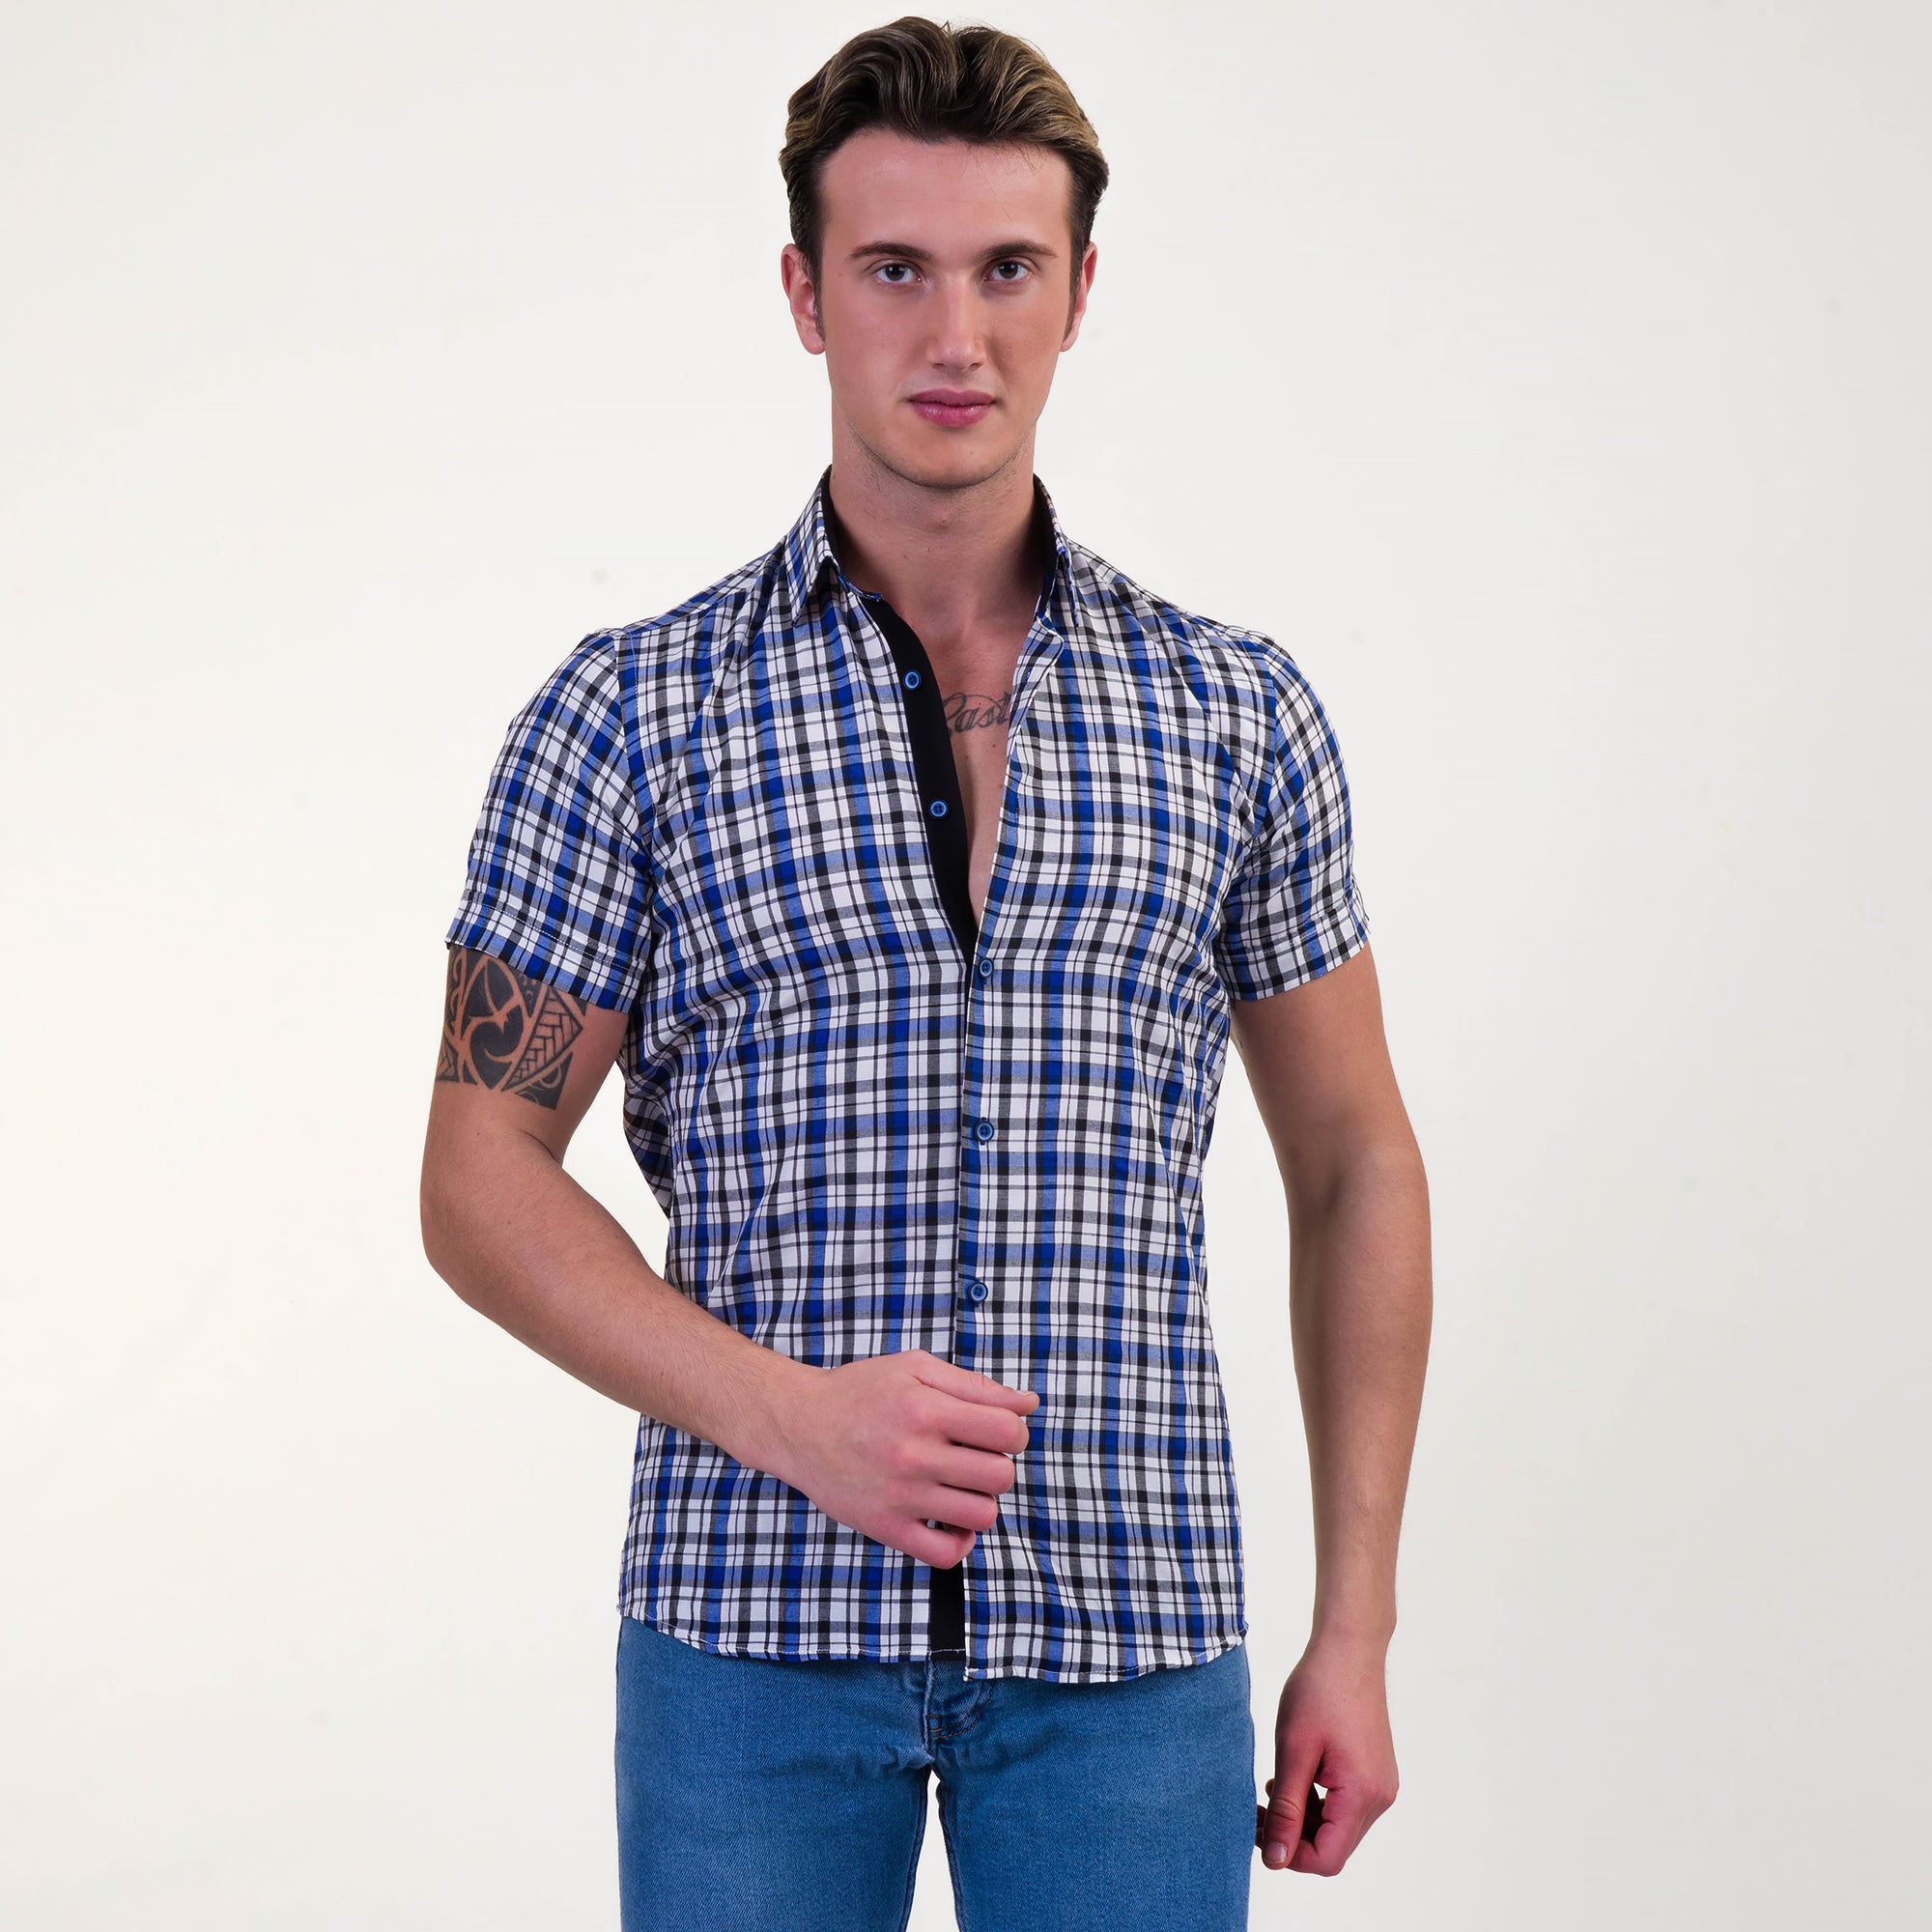 Blue & White Checkered Mens Short Sleeve Button up Shirts - Tailored Slim Fit Cotton Dress Shirts